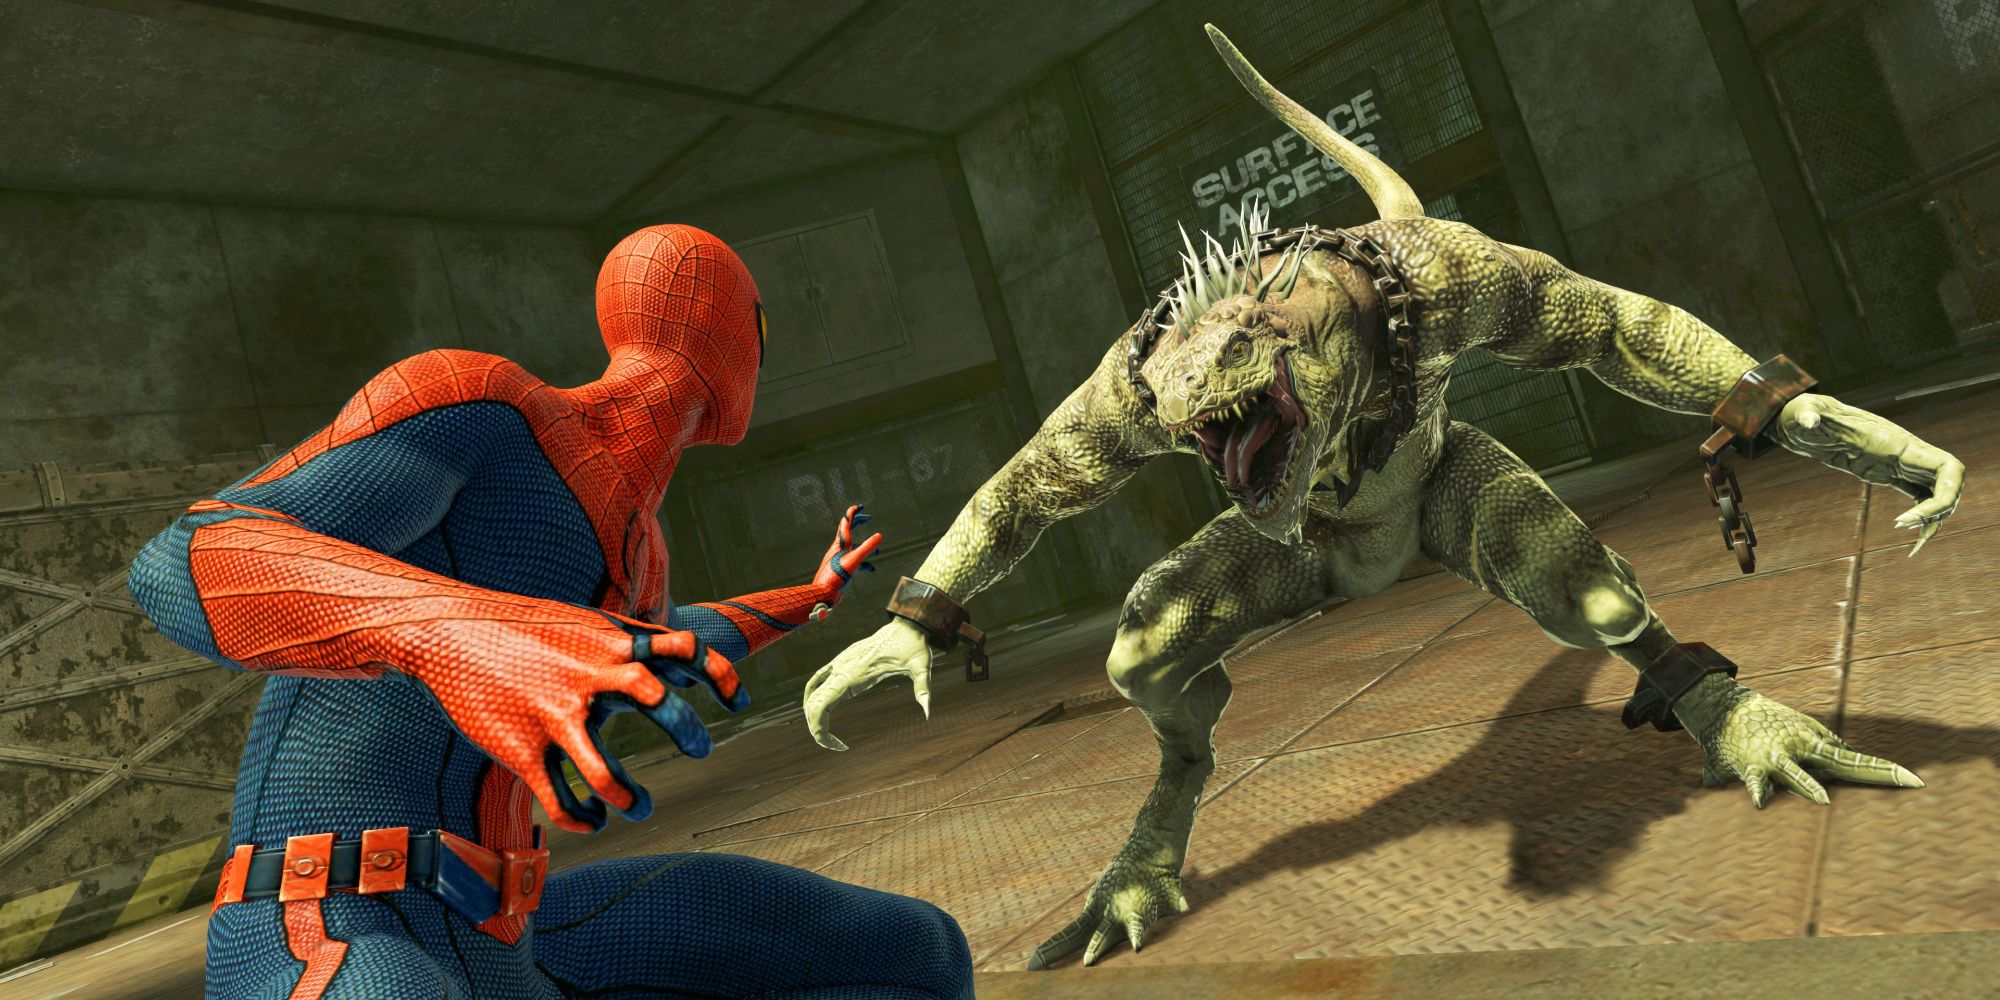 Spider-Man fighting the Iguana in The Amazing Spider-Man video game